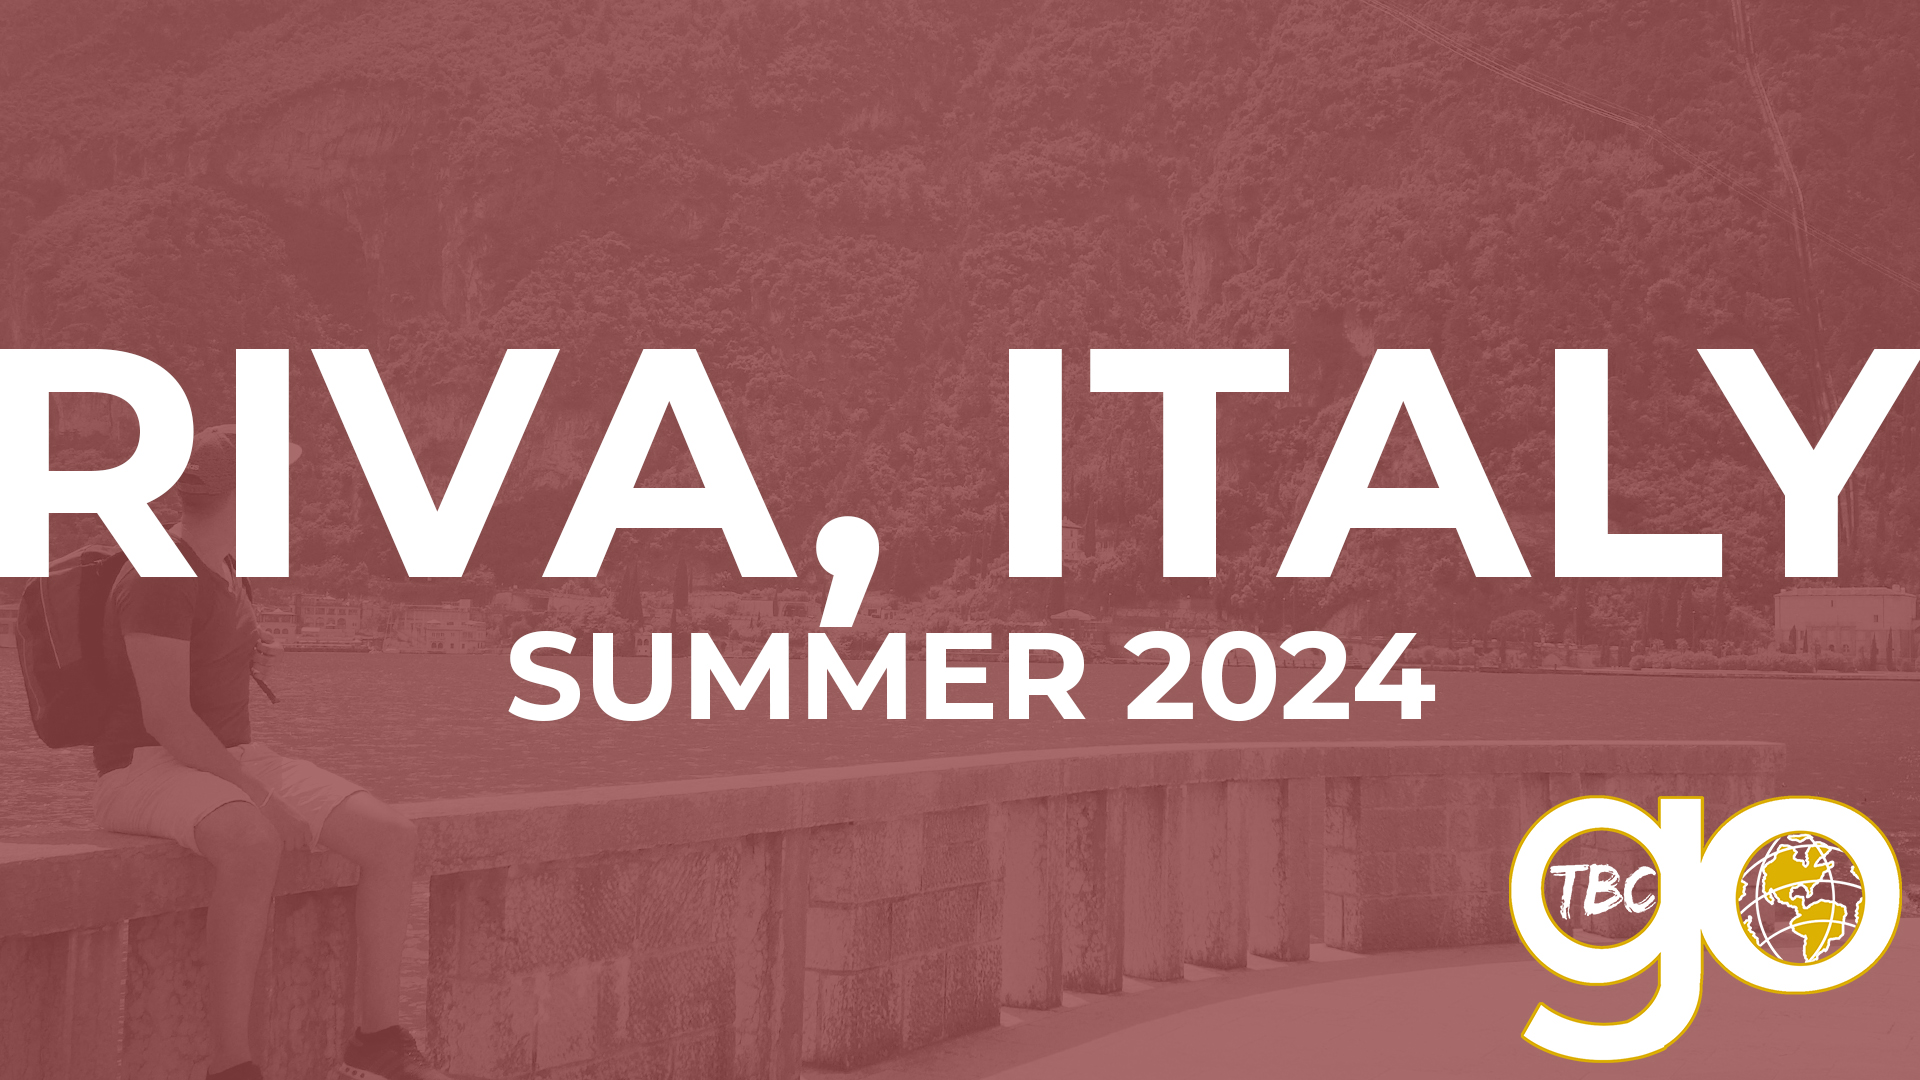 Riva, Italy Mission Trip